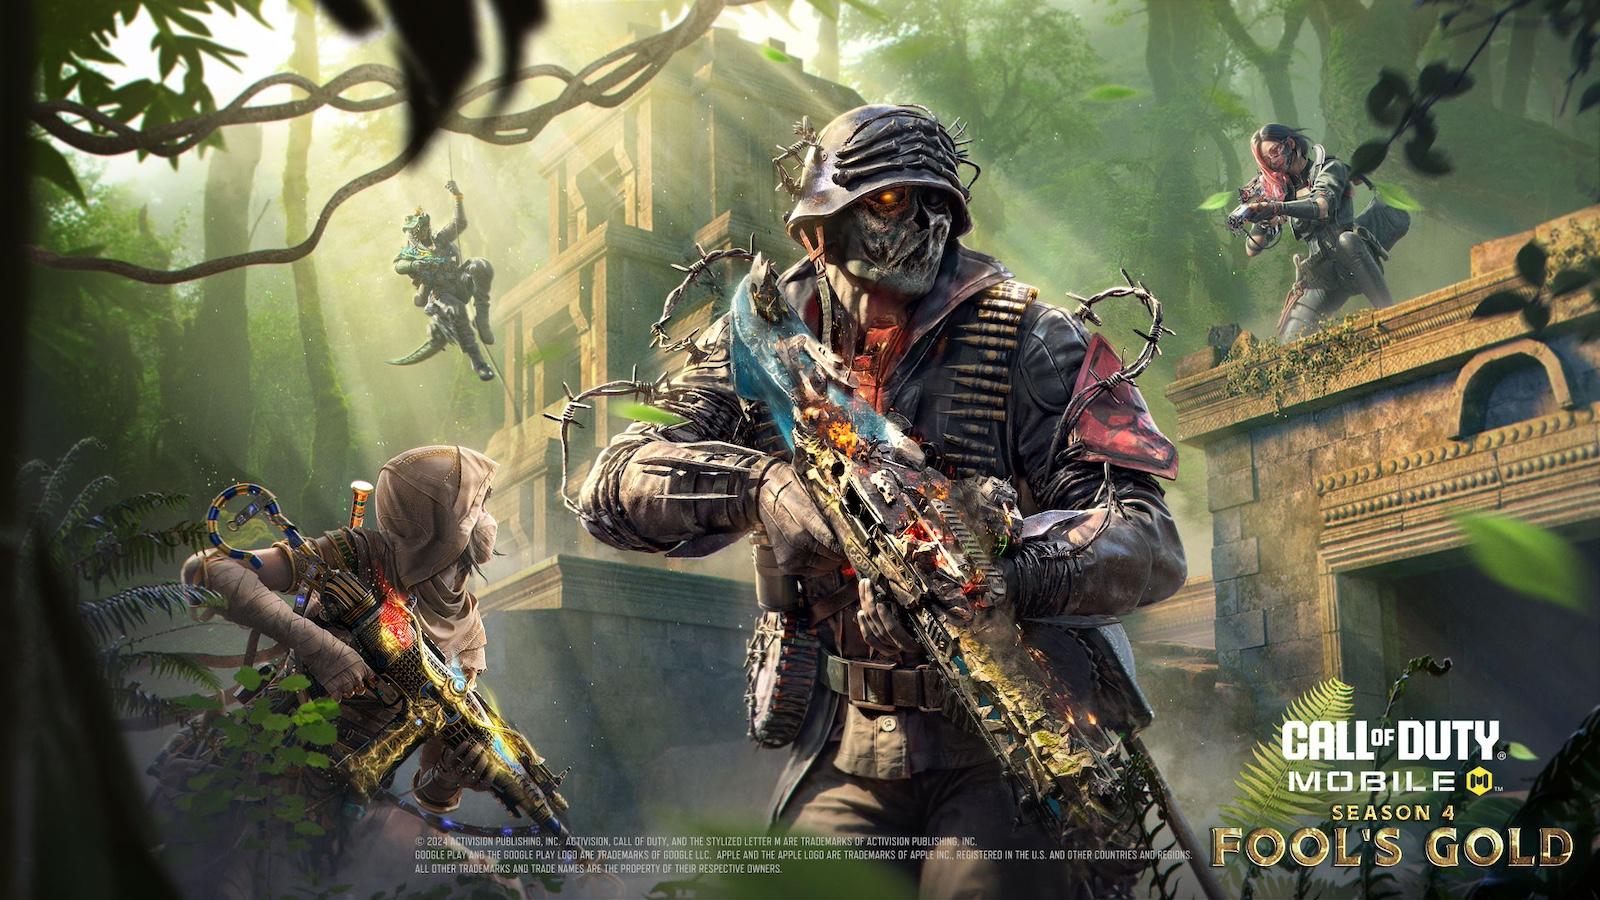 Call of Duty Mobile Fool's Gold concept art